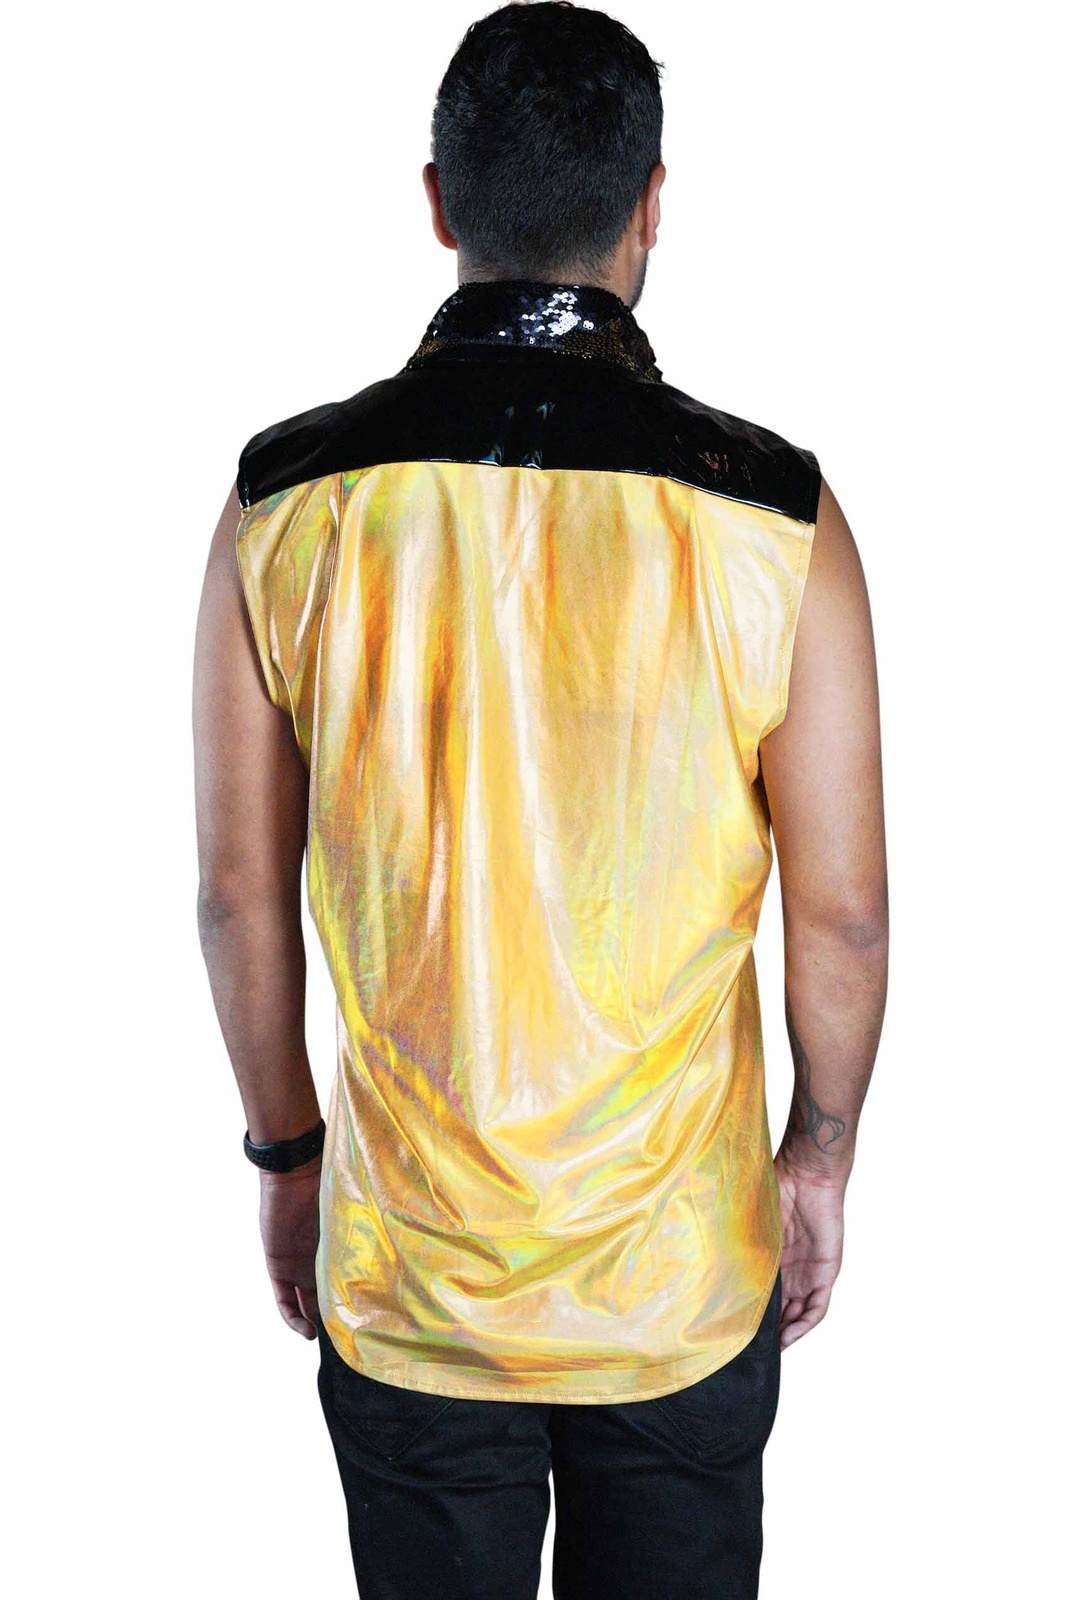 Black and Holographic Gold Ruffle Tuxedo Shirt from Love Khaos Festival Clothing brand.